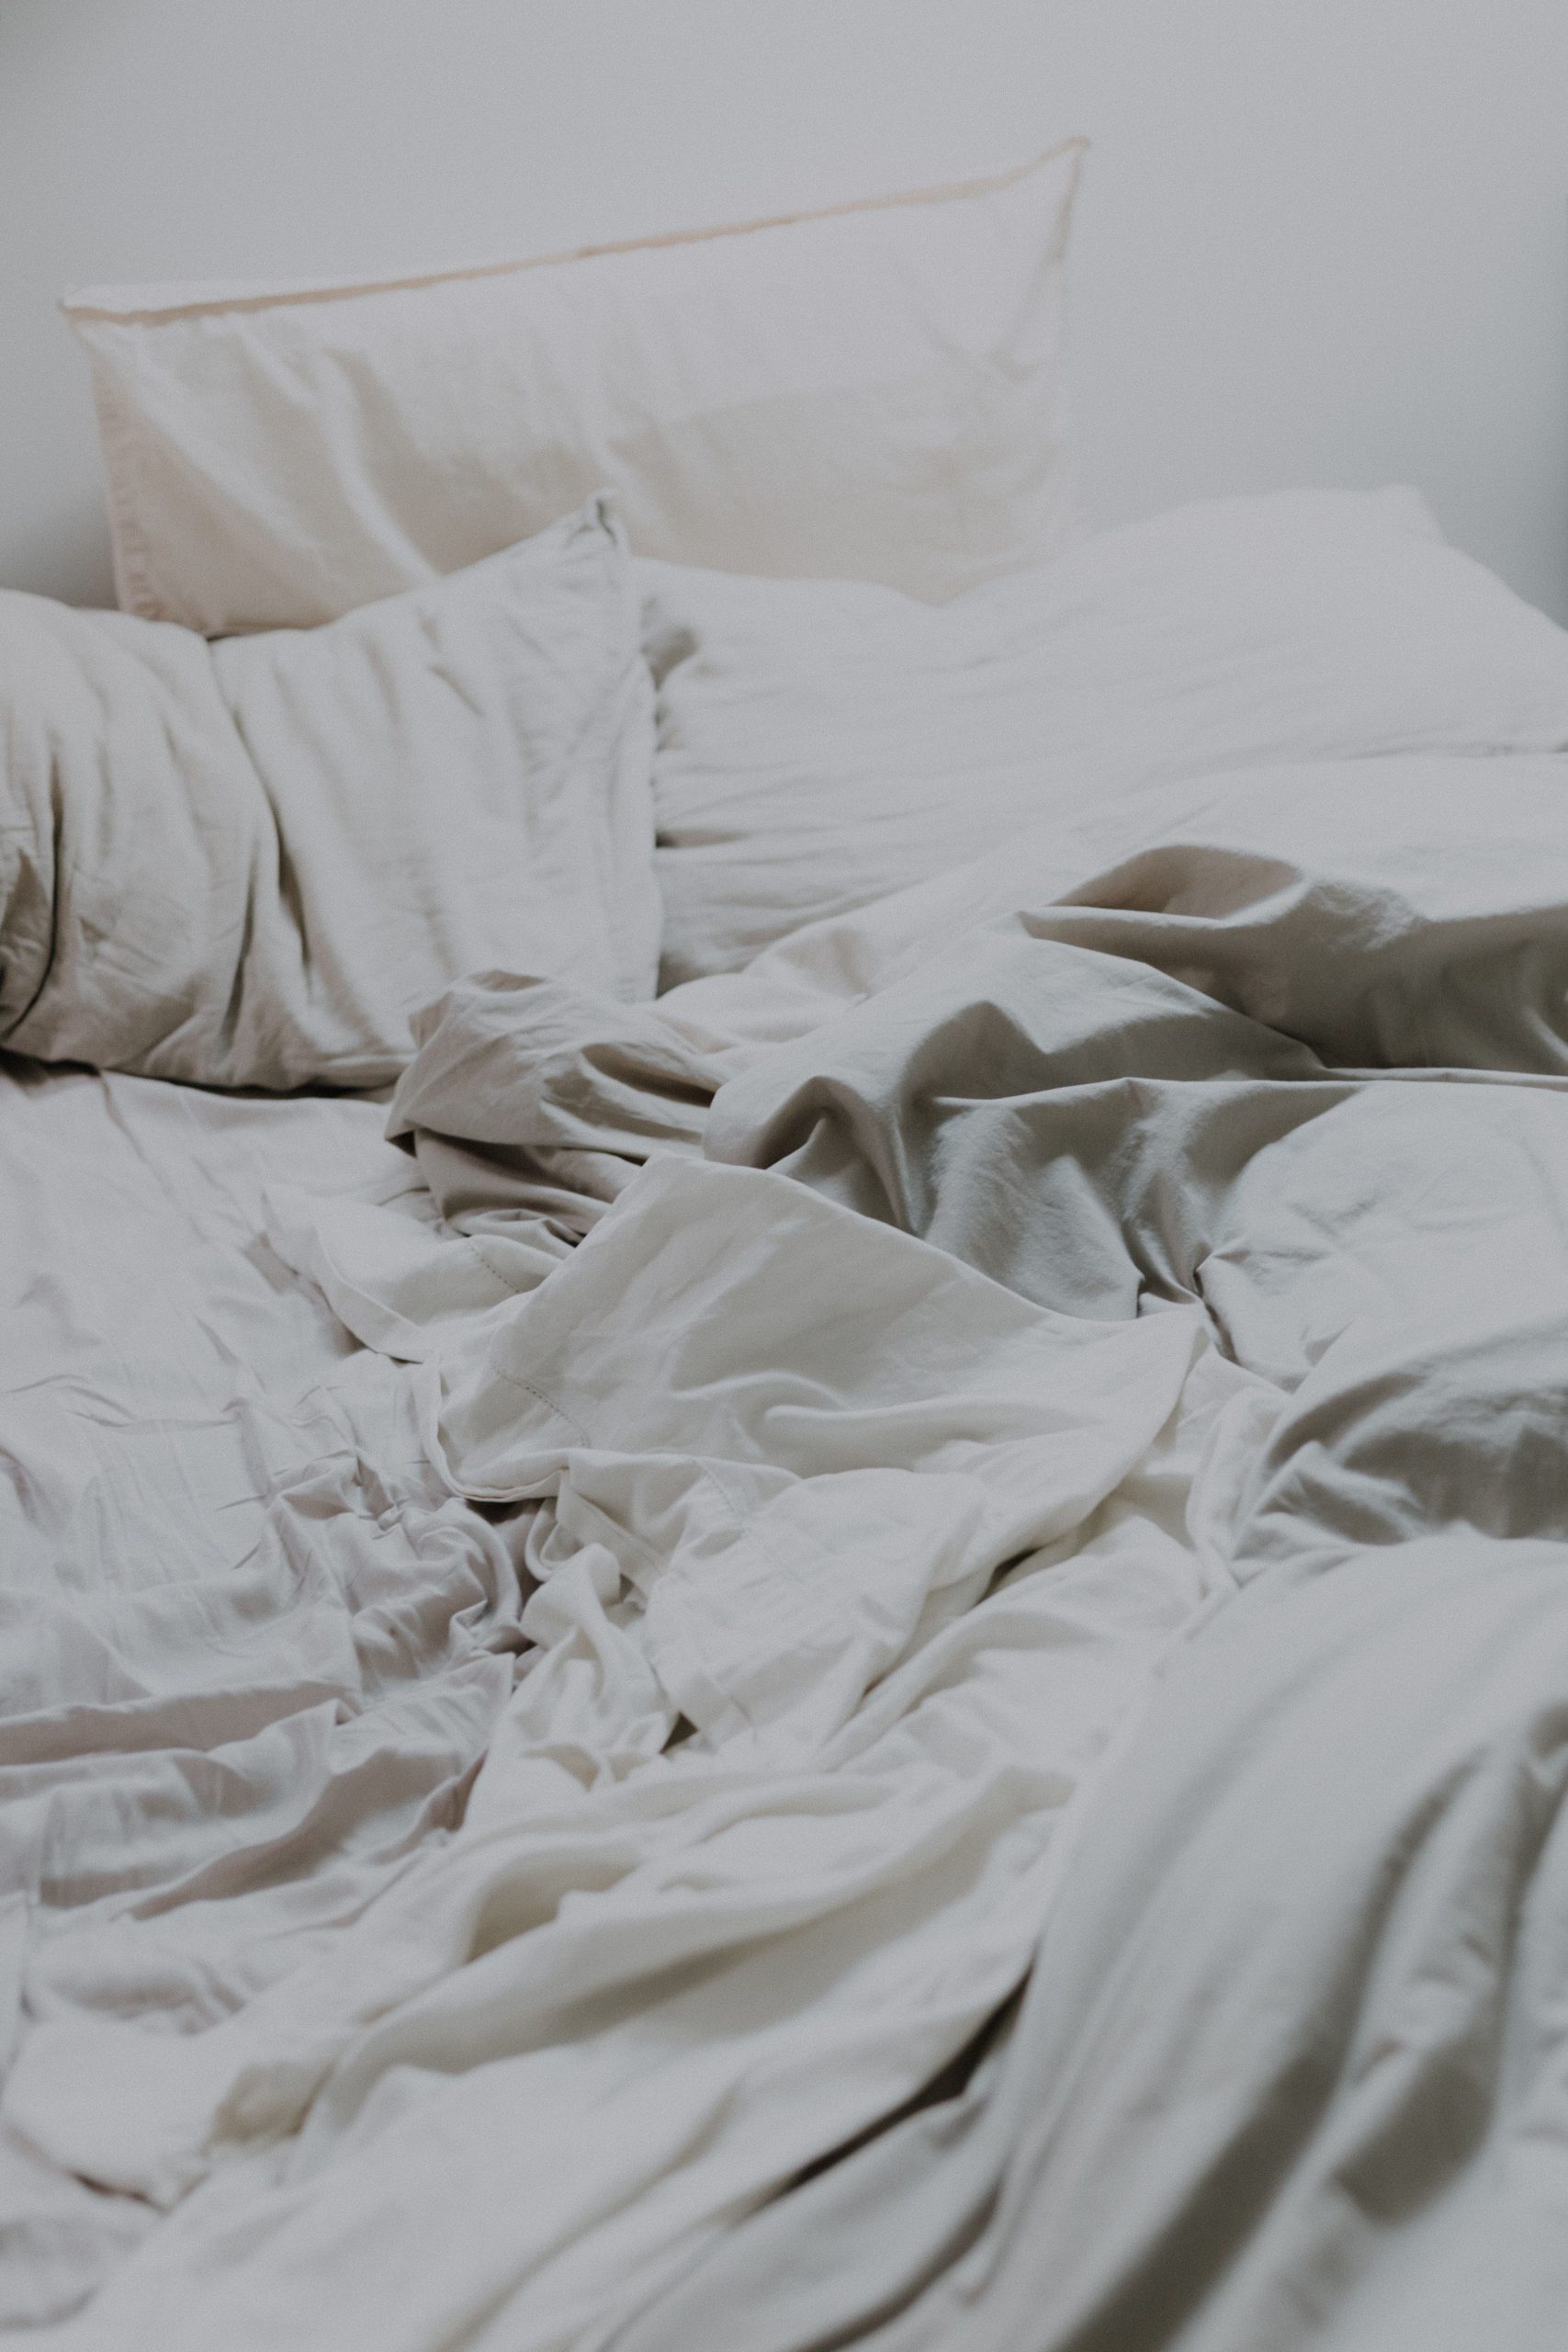 How frequently should you wash your bed linens?